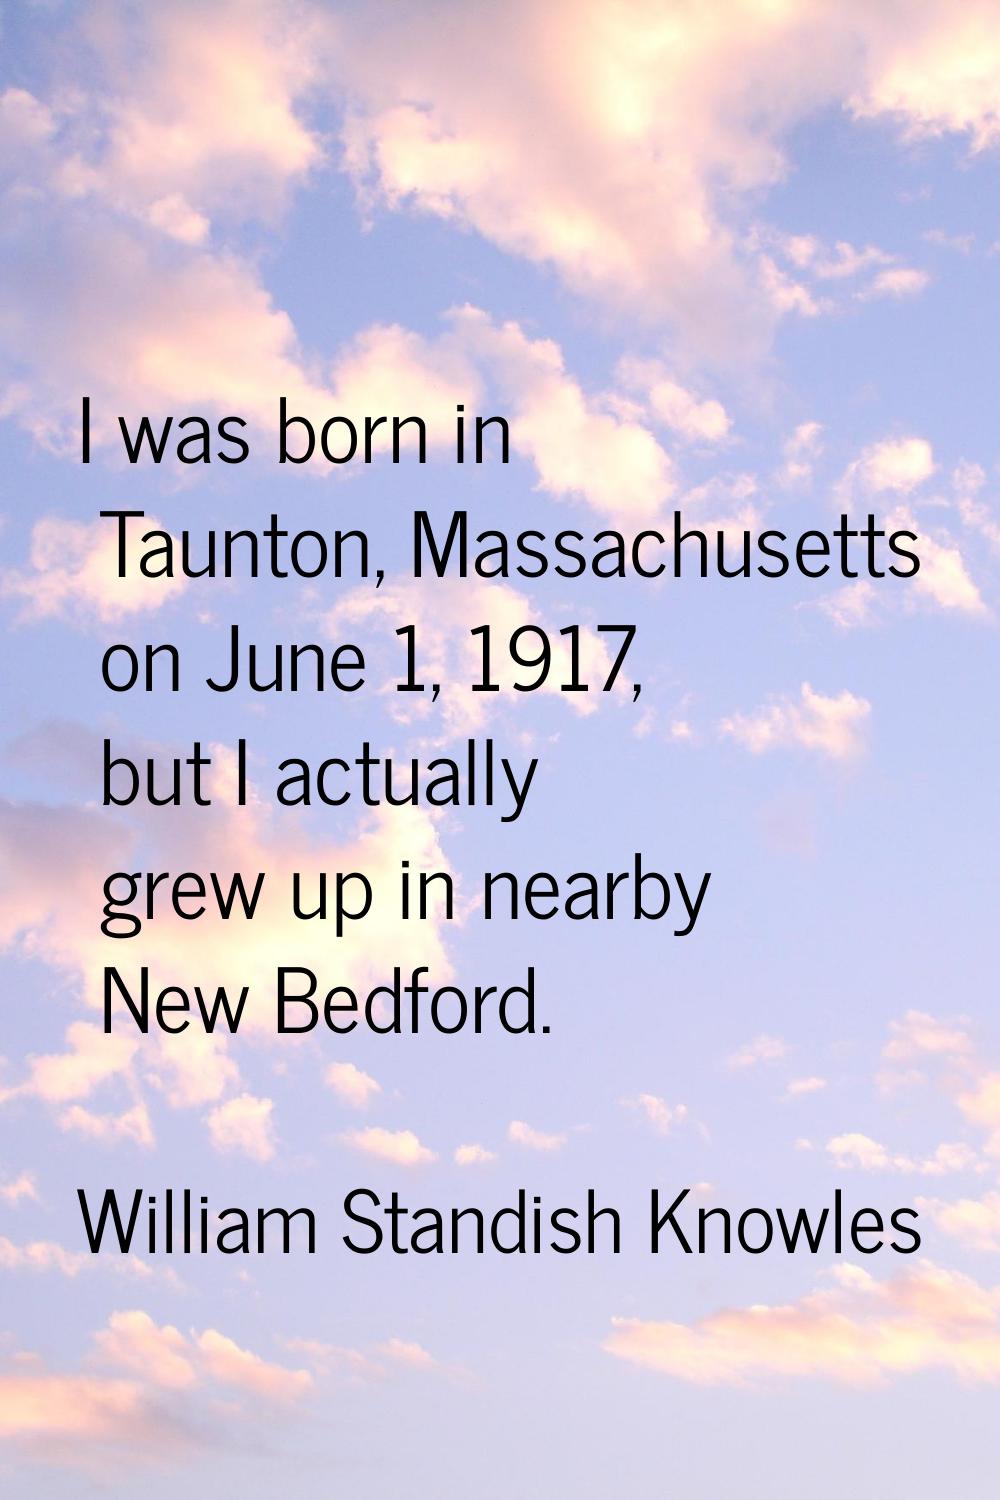 I was born in Taunton, Massachusetts on June 1, 1917, but I actually grew up in nearby New Bedford.